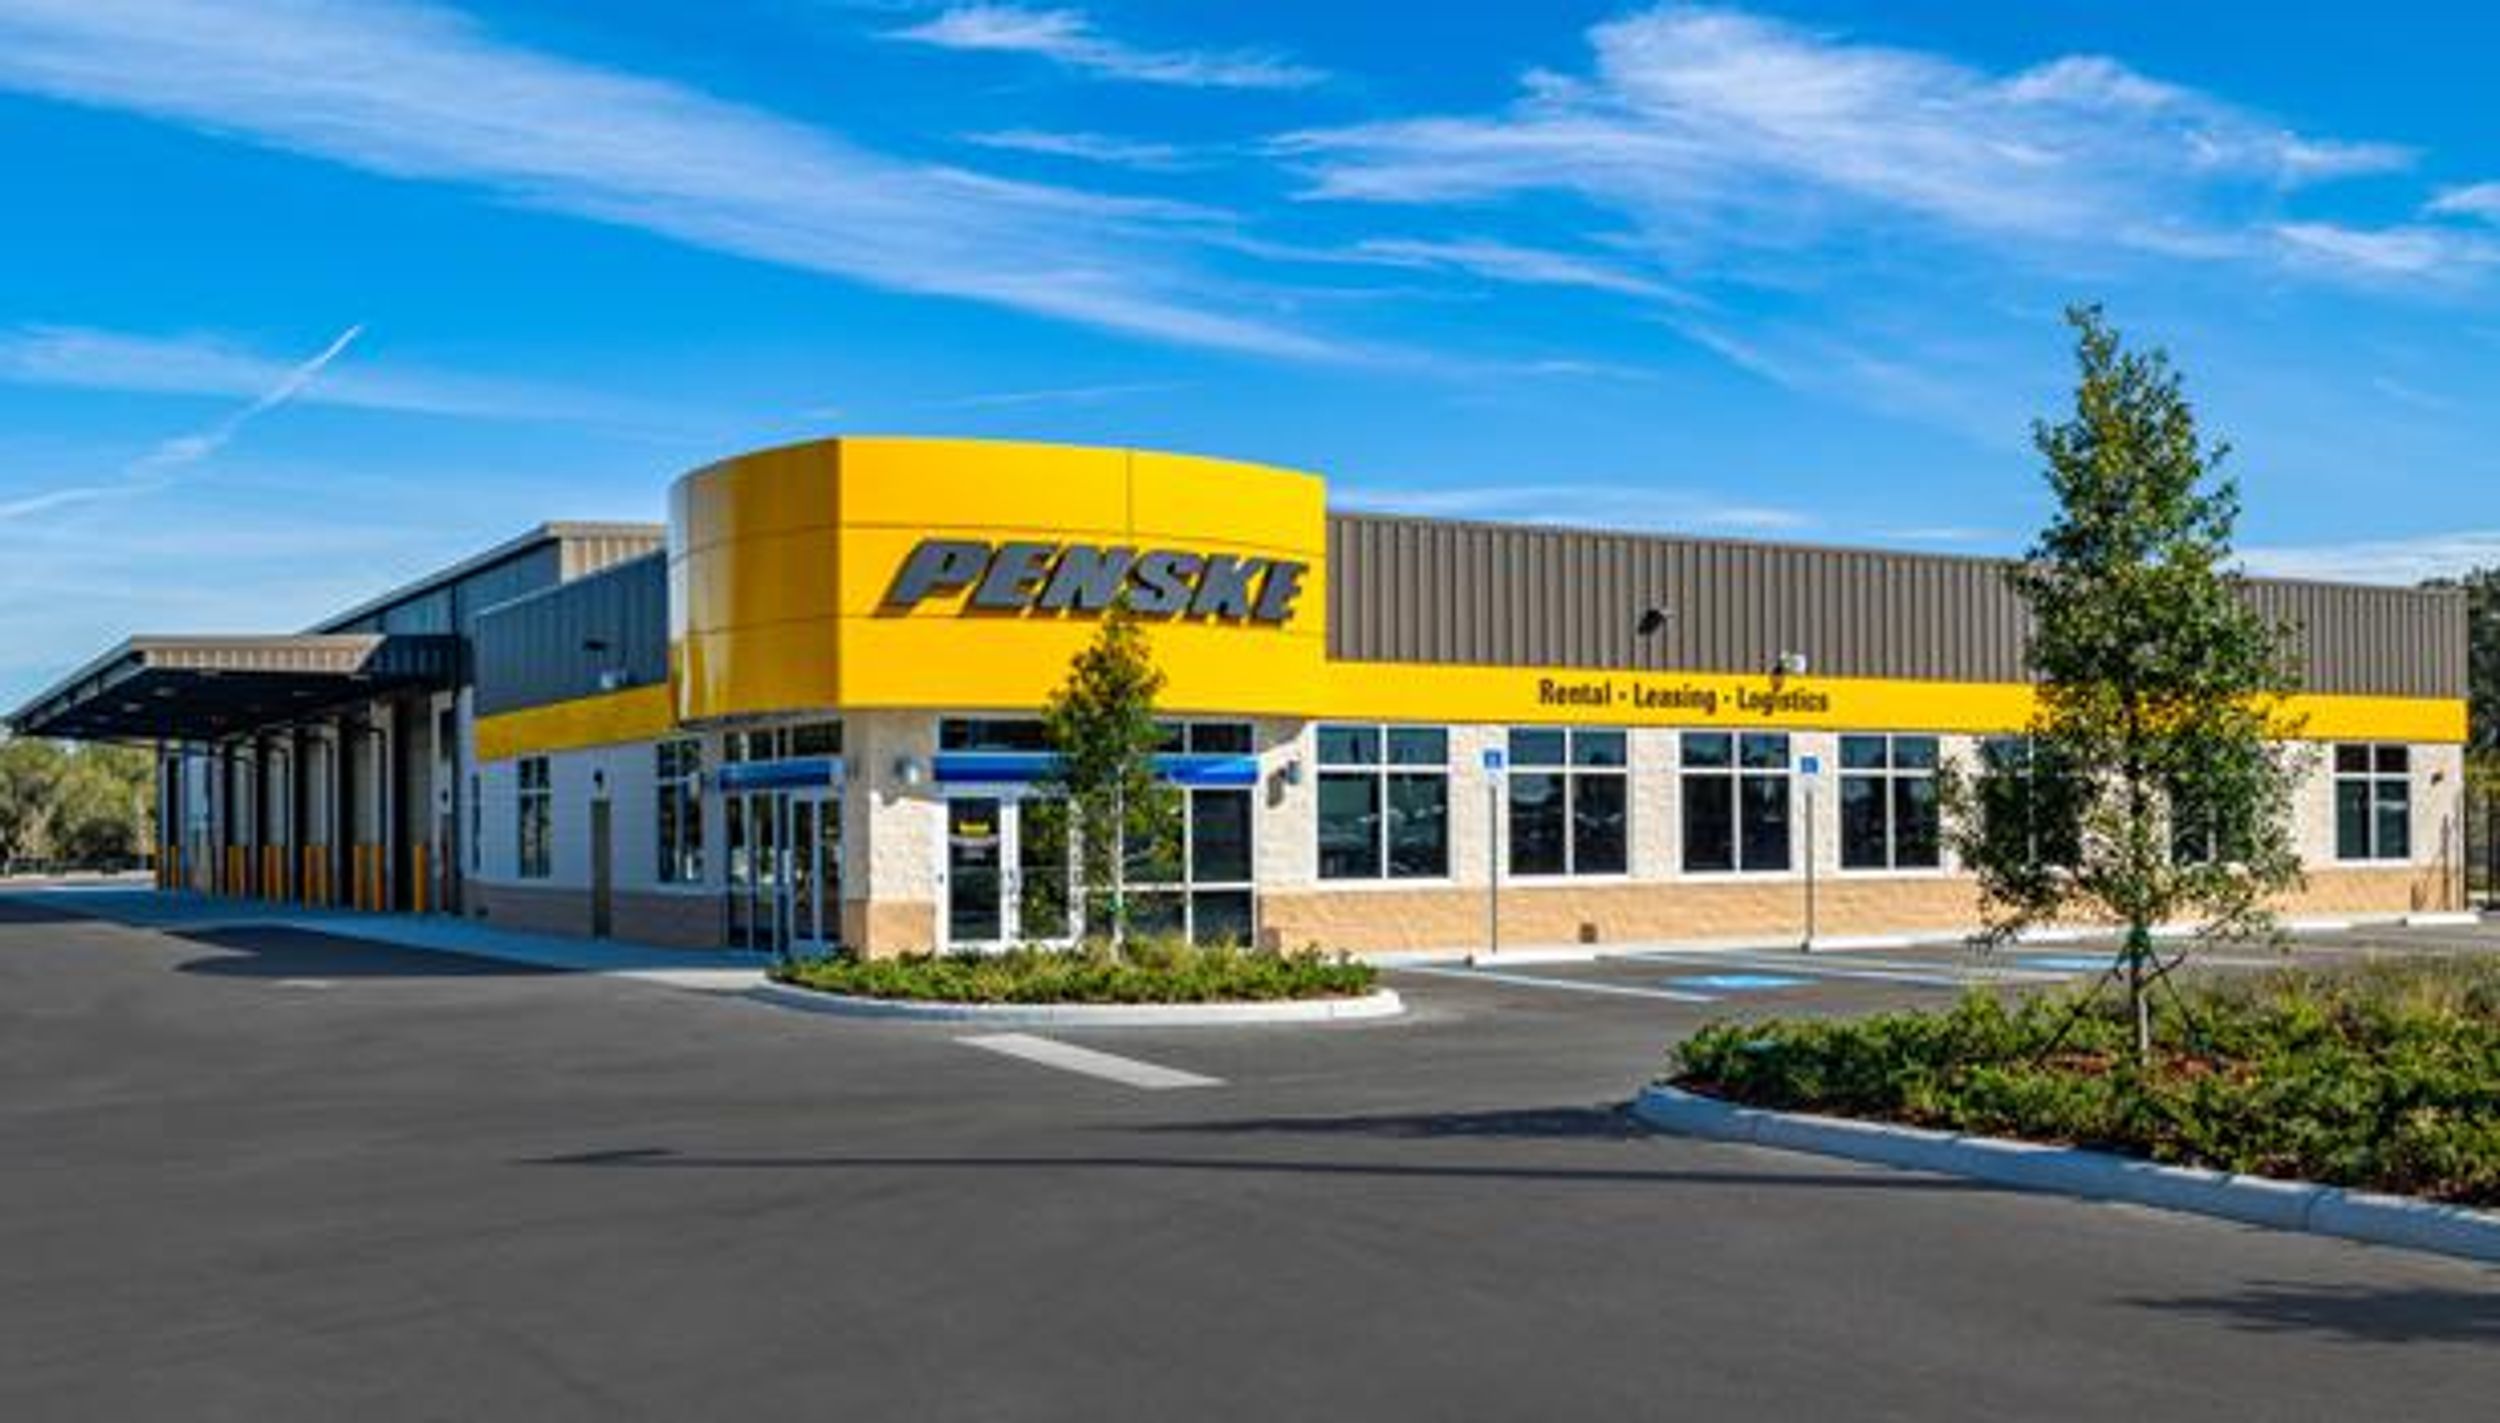 Penske Truck Leasing Opened New Southeast Facility in Tampa, Florida